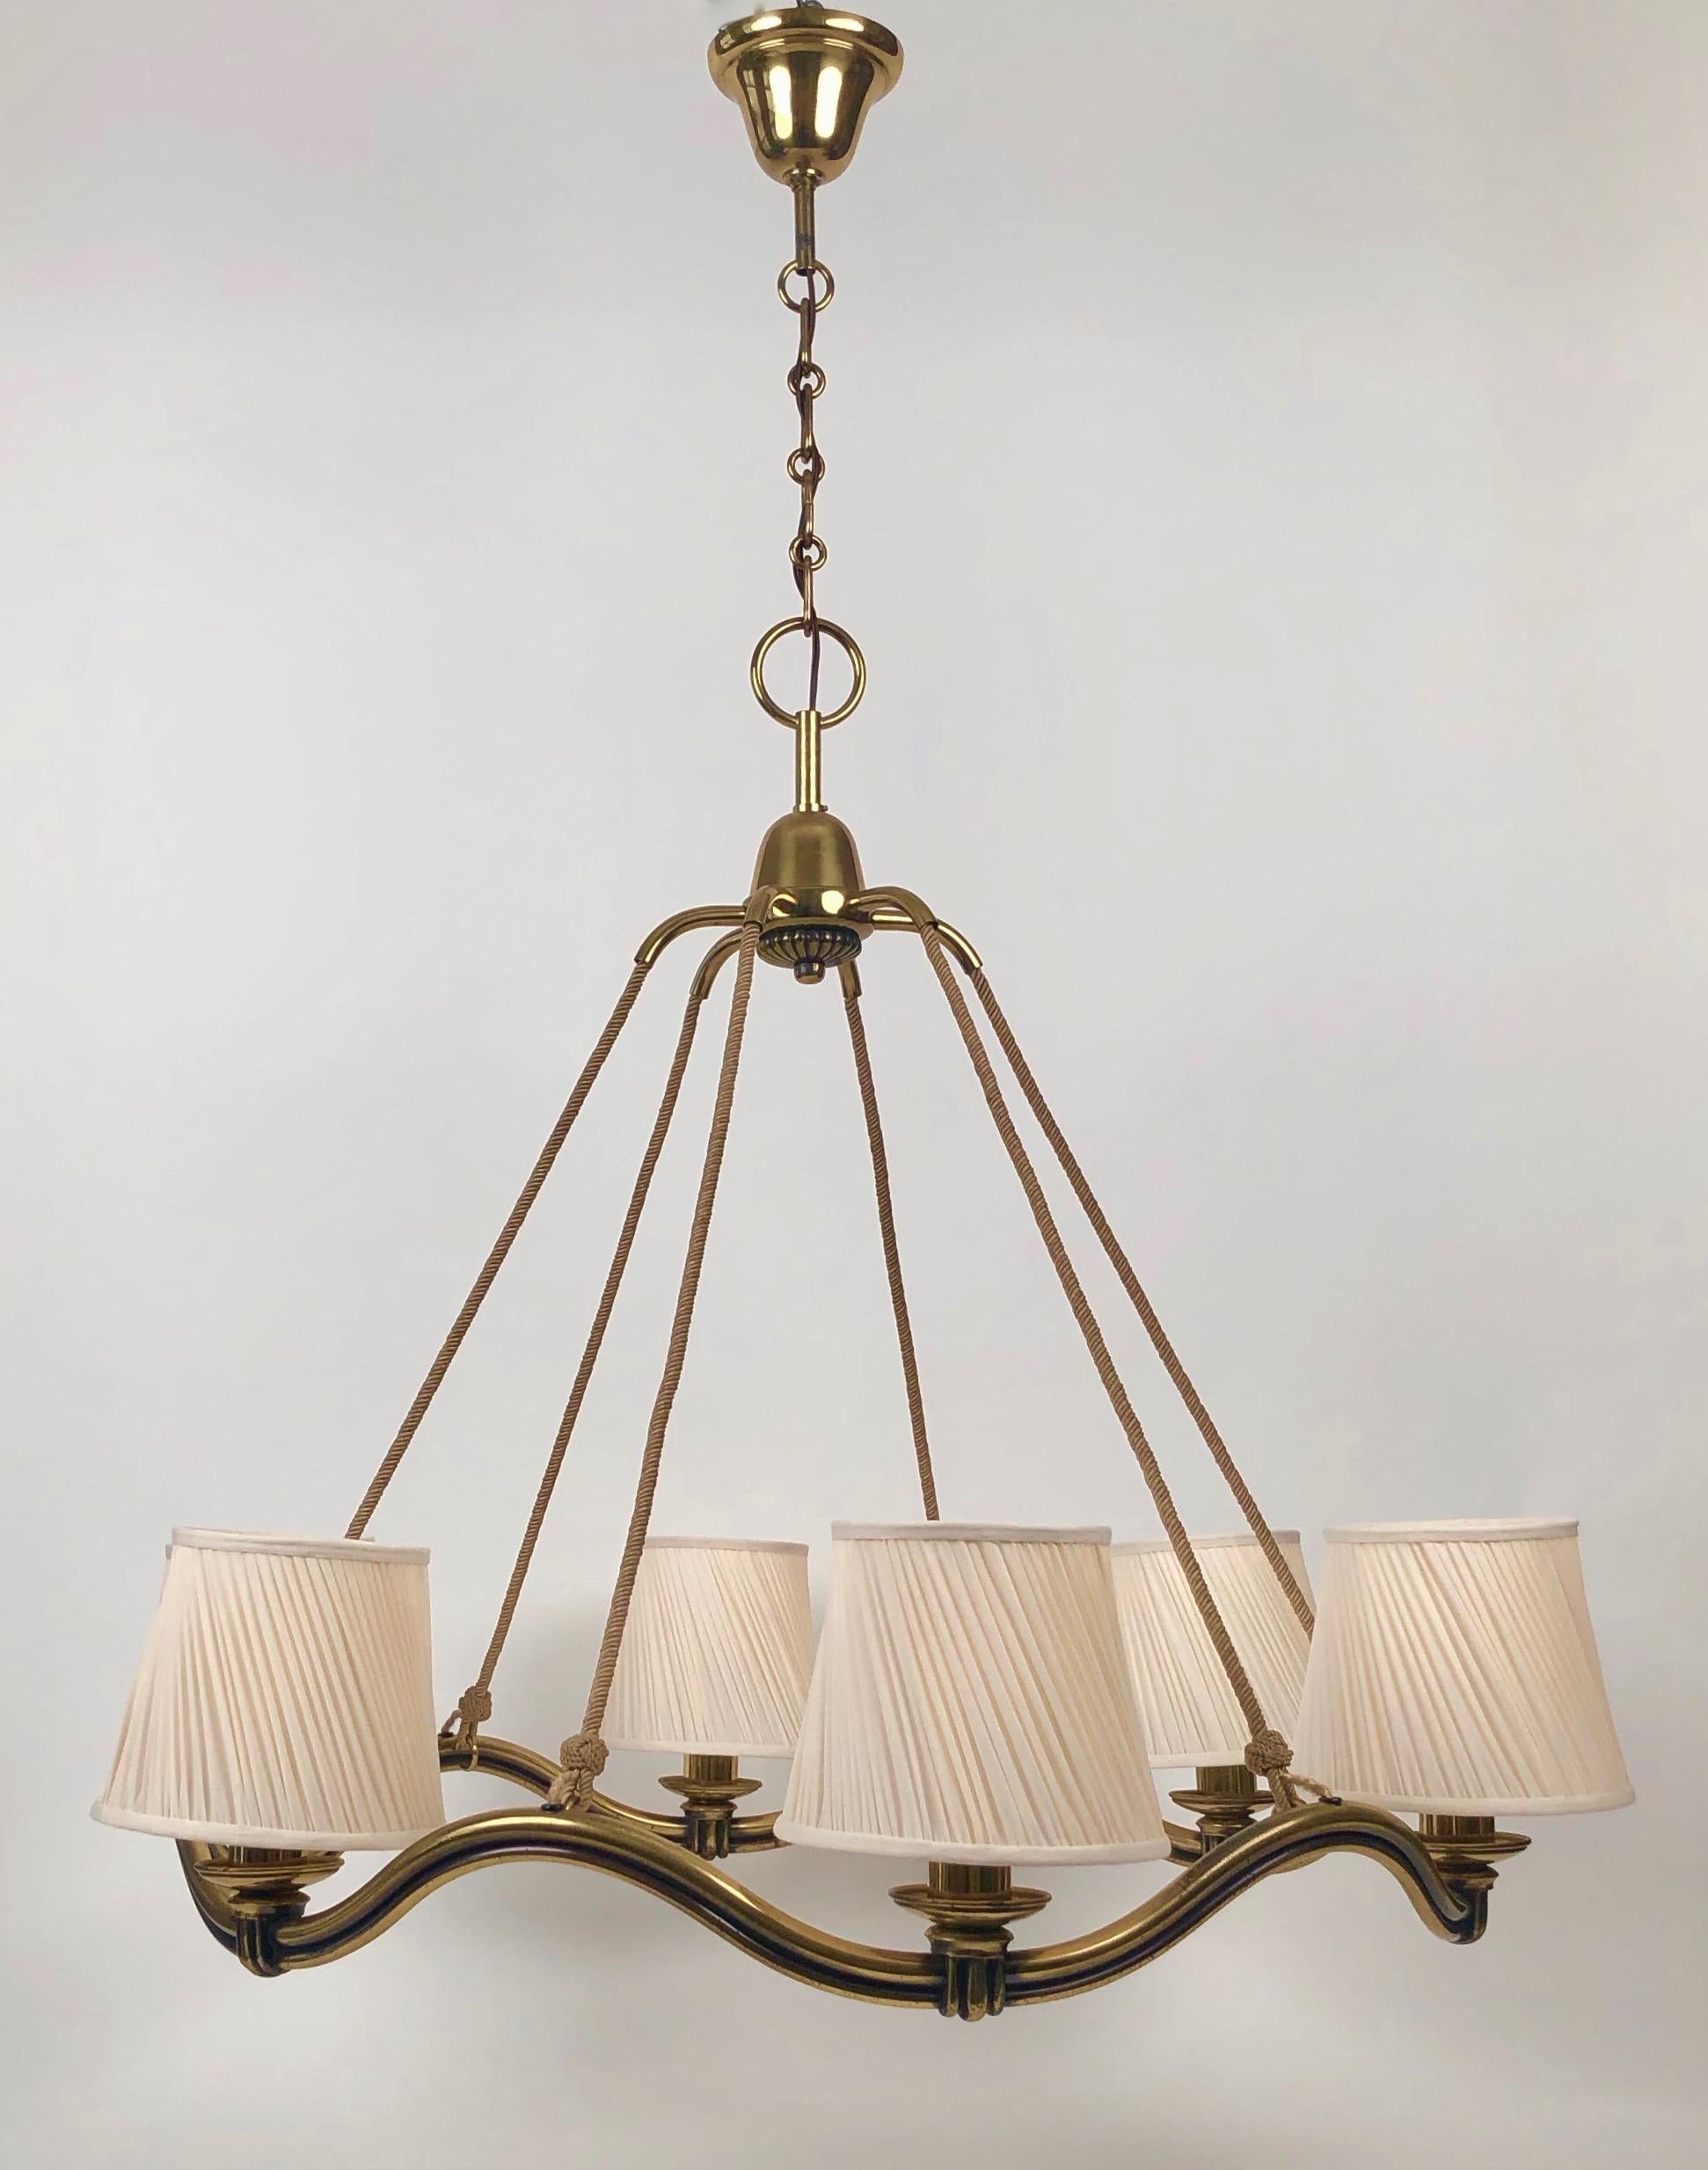 Early modernist pendant lamp from Hugo Gorge . The Wave is a pressure cast brass lamp with 6 e-27 fixtures.
The quality and fit is very impressive. This version was produced from the early 1930's until the early 1950's in
limited numbers. The